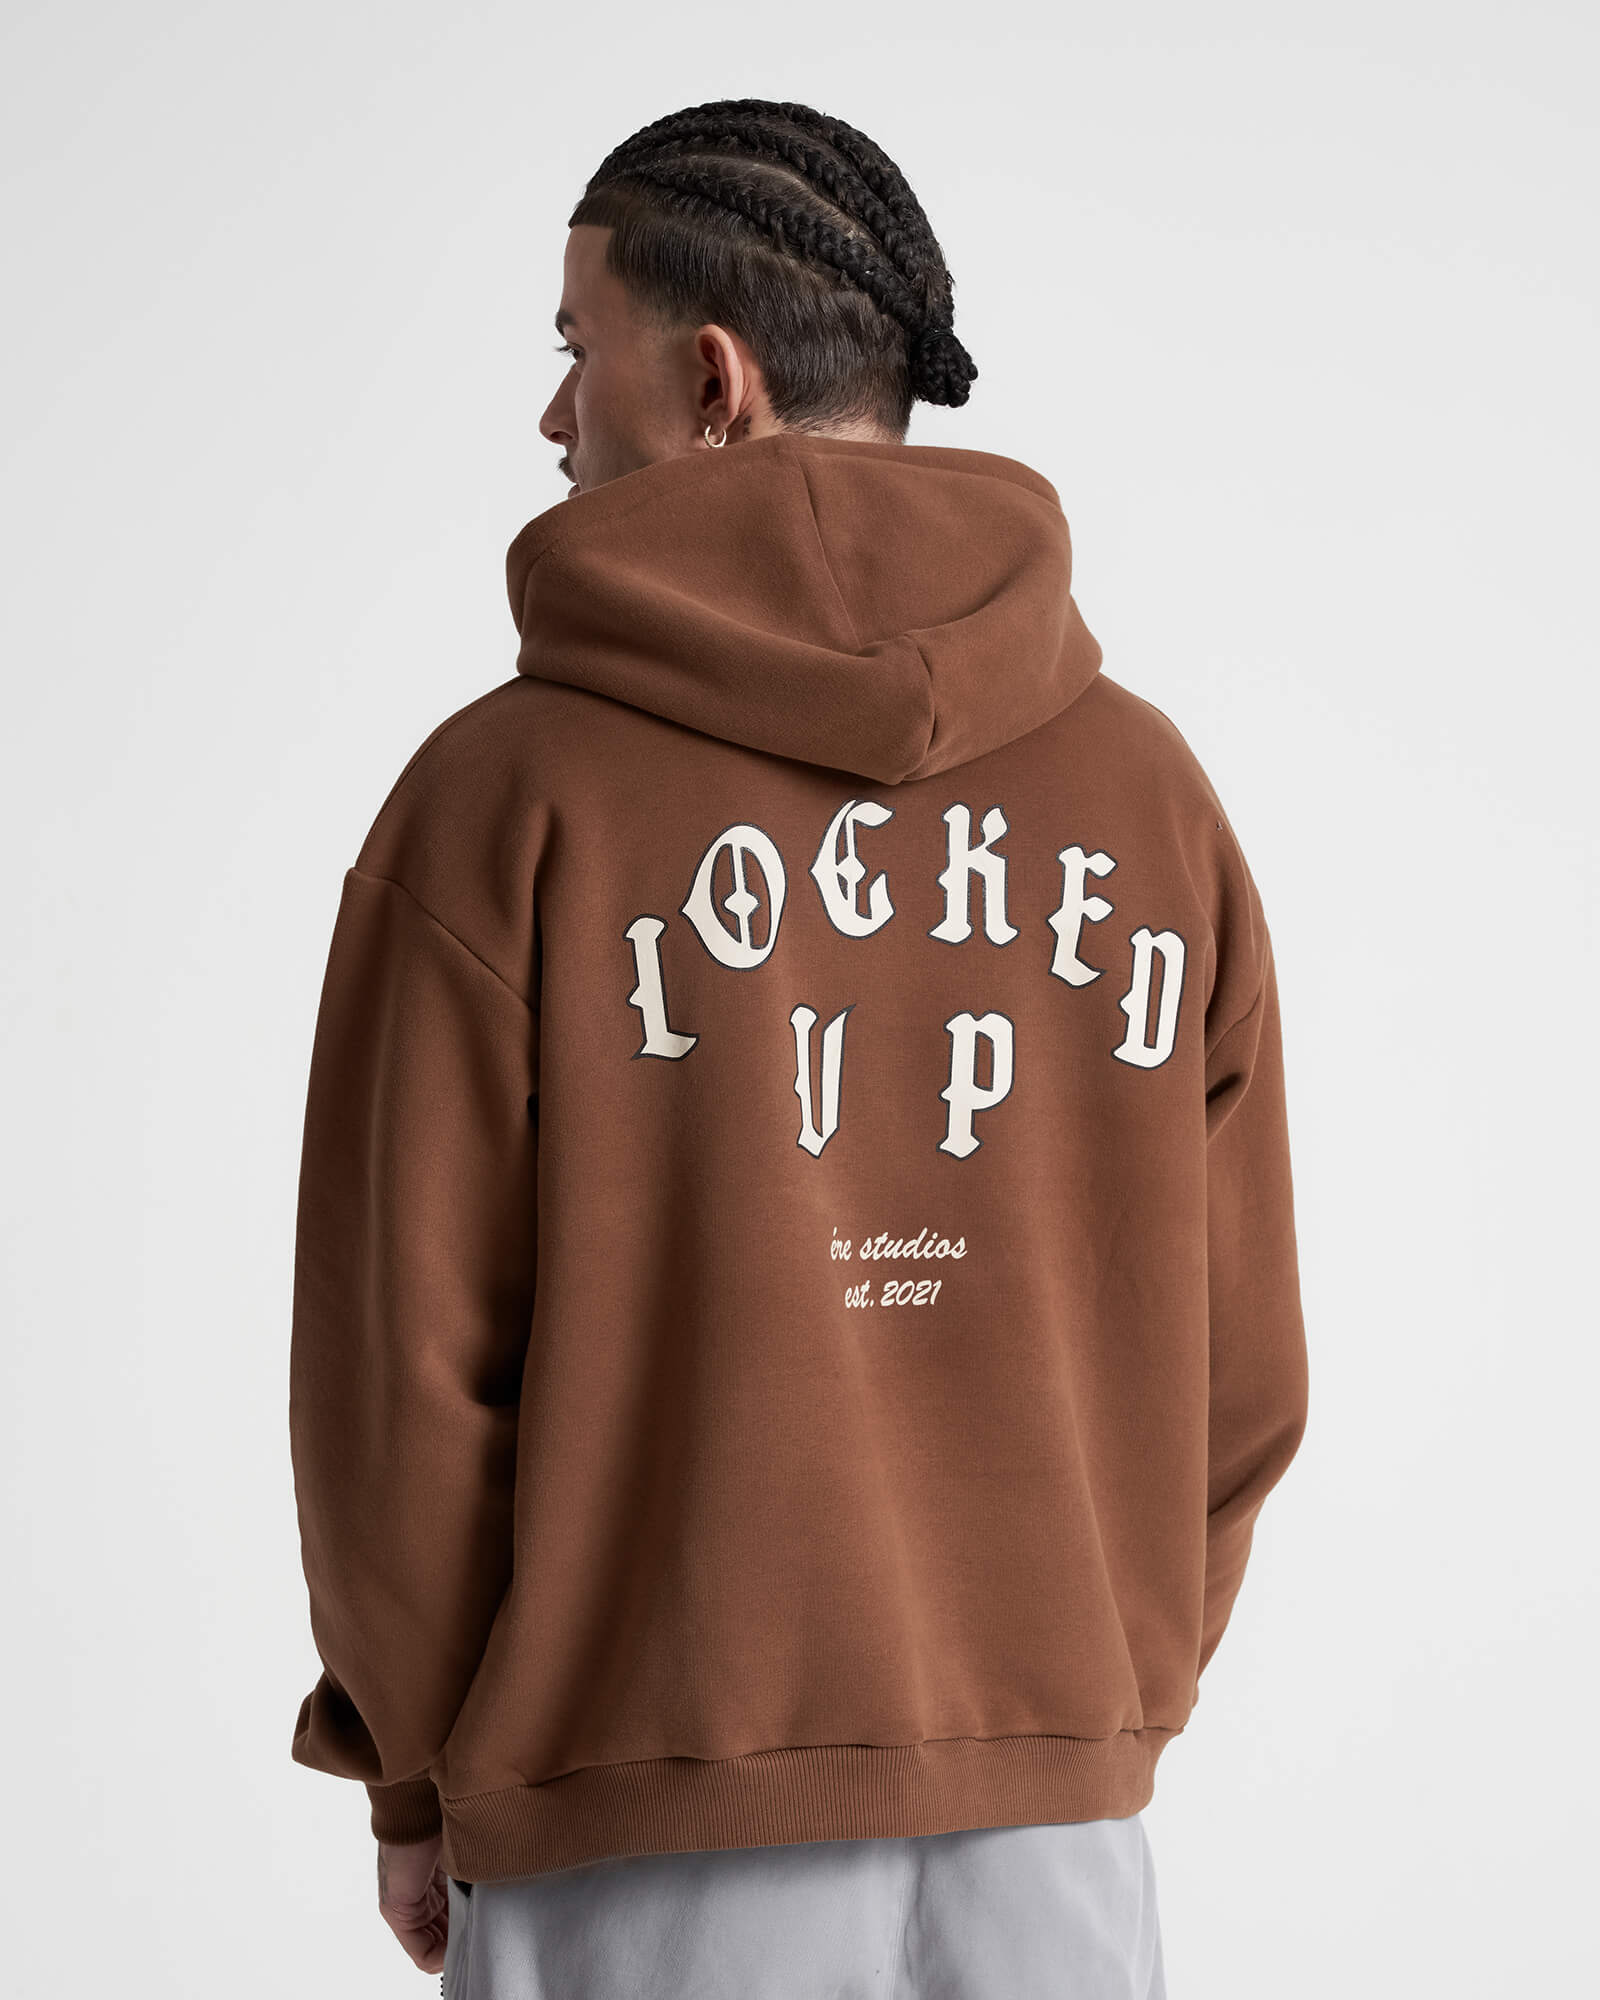 Locked Up Hoodie - Cocoa Brown